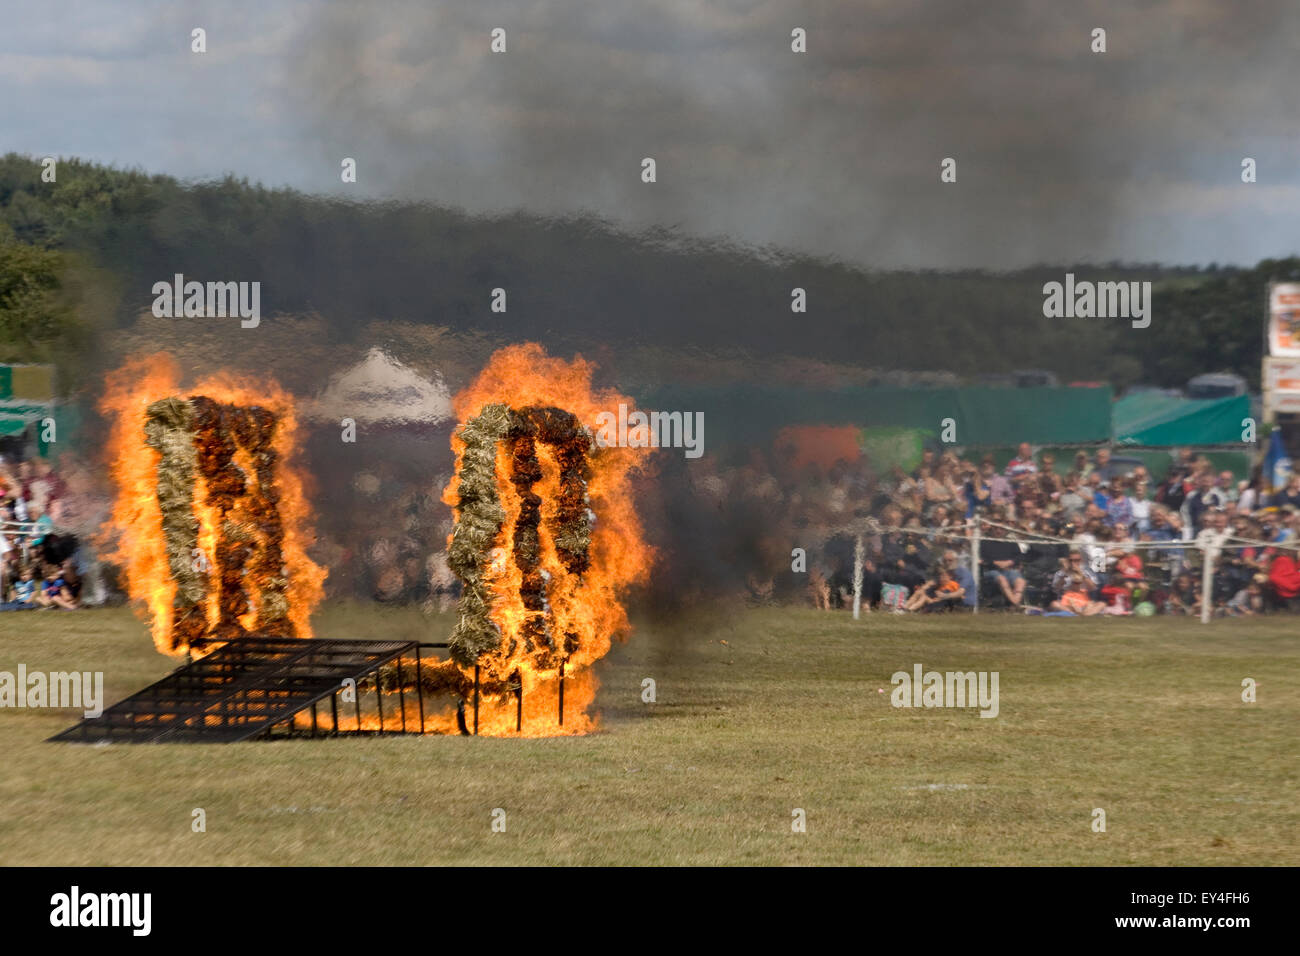 Royal corps of signals white helmet motorcycle display team 750 cc Triumph TR7V Tiger Motorcycles Jumping through Fire Stock Photo